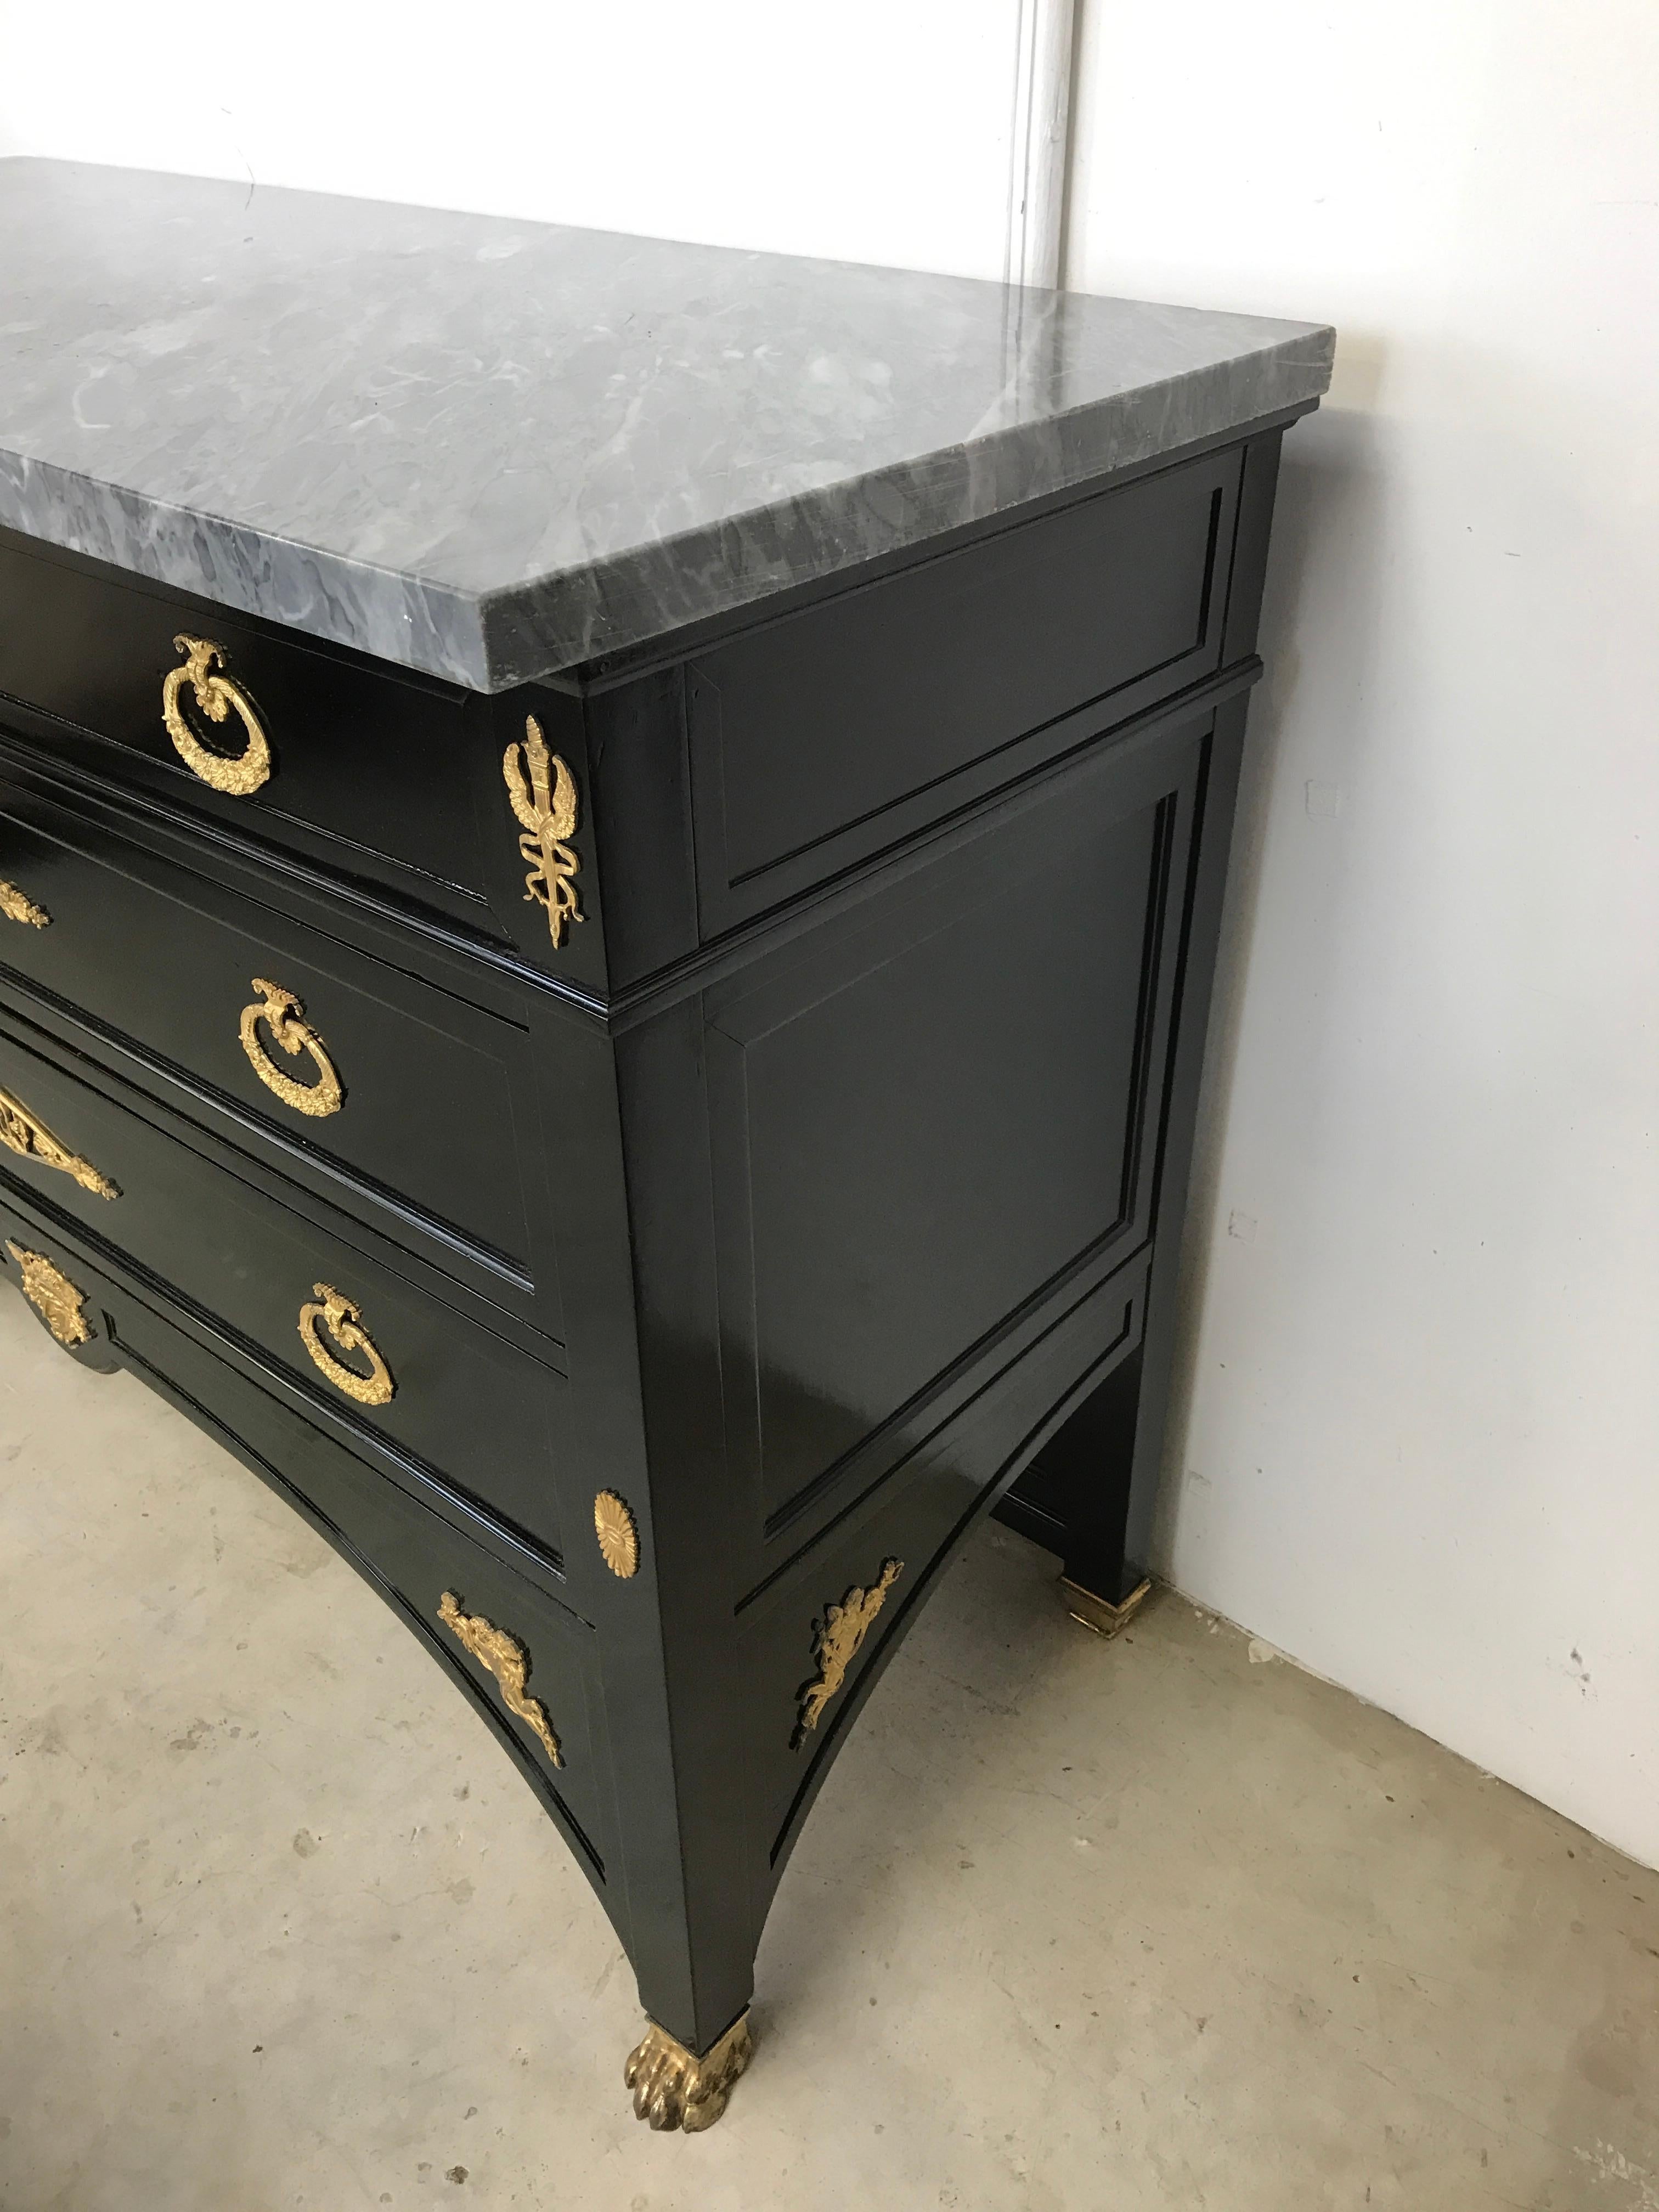 A exceptional empire style commode, with ormolu mounts and bronze feet. With a very smart blue/grey marble. A rare and unusual model, in exceptional condition. The maker's name is on the back of the commode. This is the only commode, I've seen like